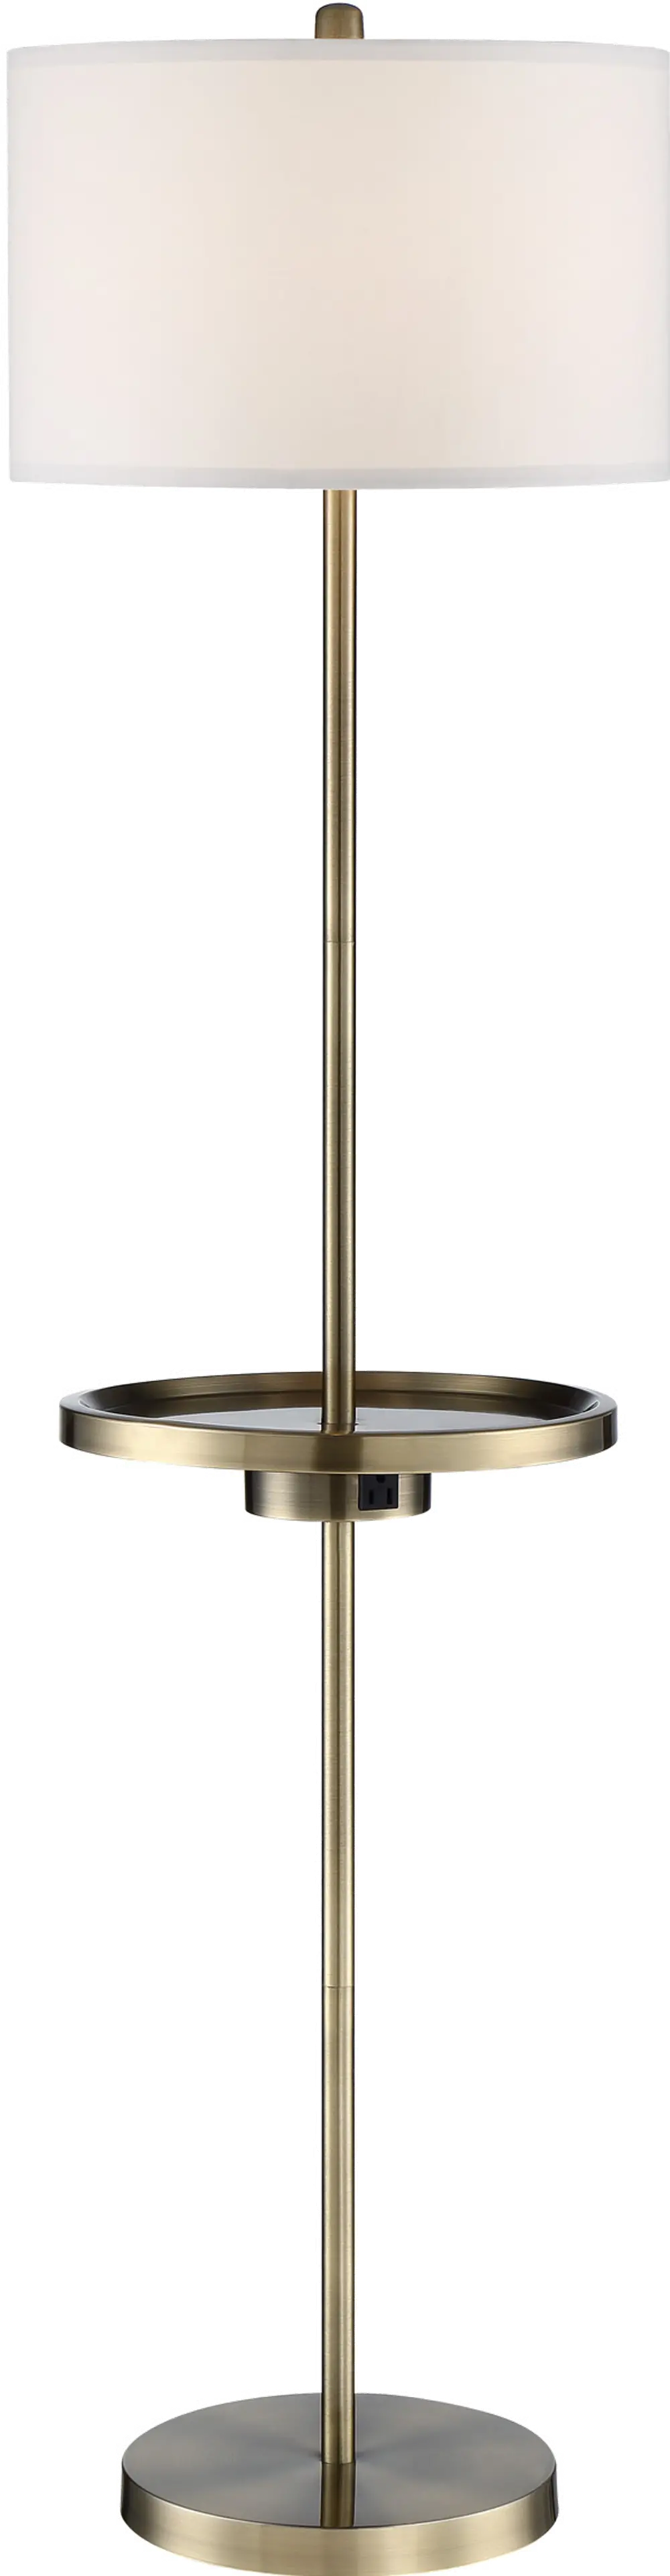 Antique Brass Floor Lamp with Tray, USB and Outlet-1